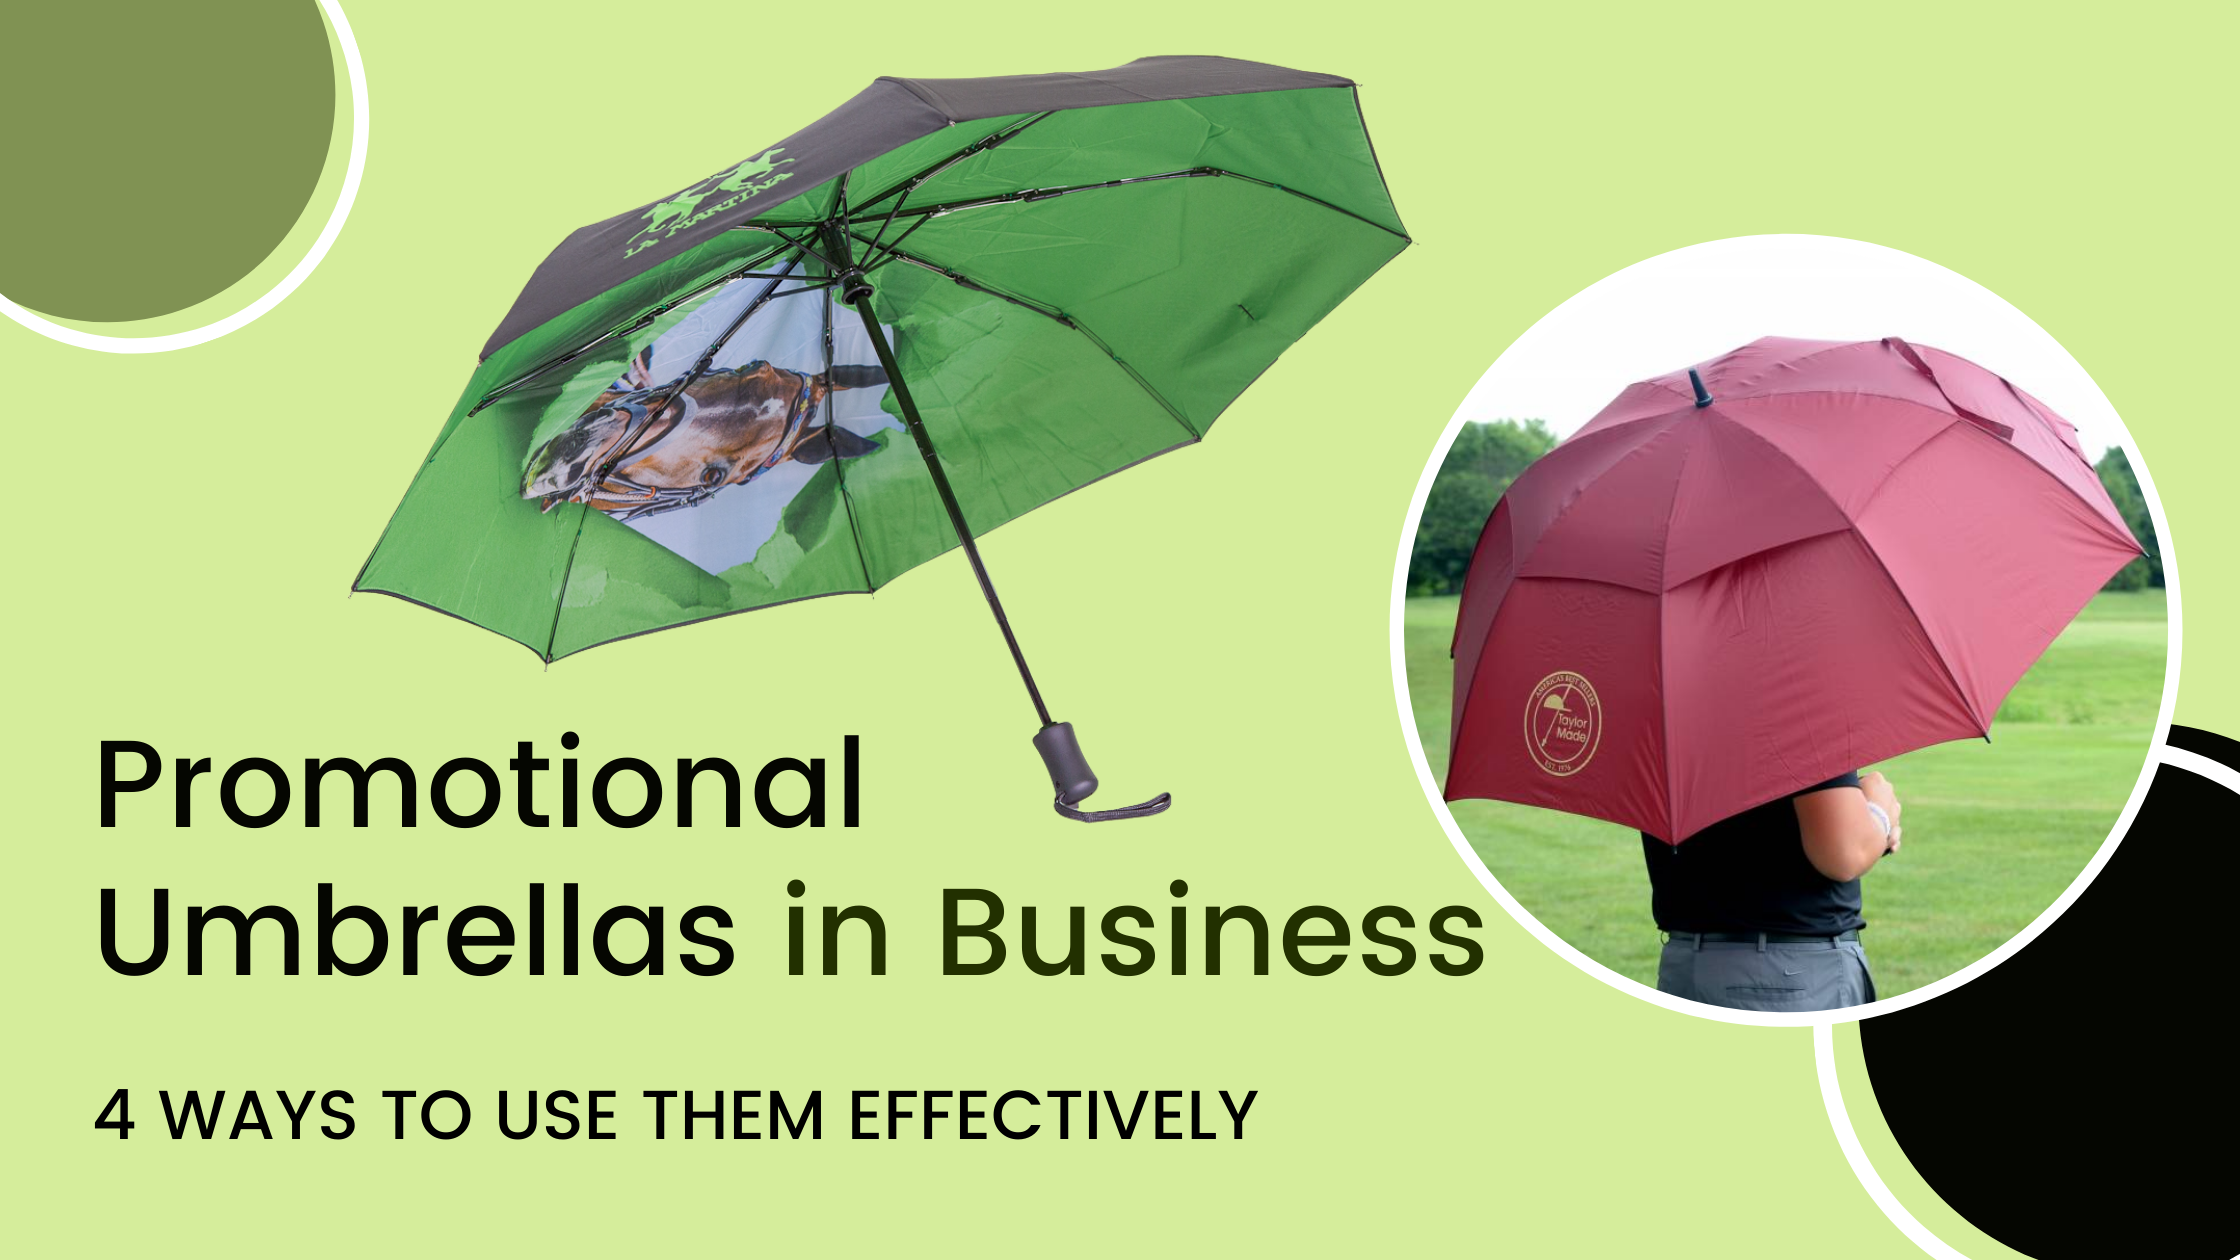 4 Ways to use promotional umbrellas in Business